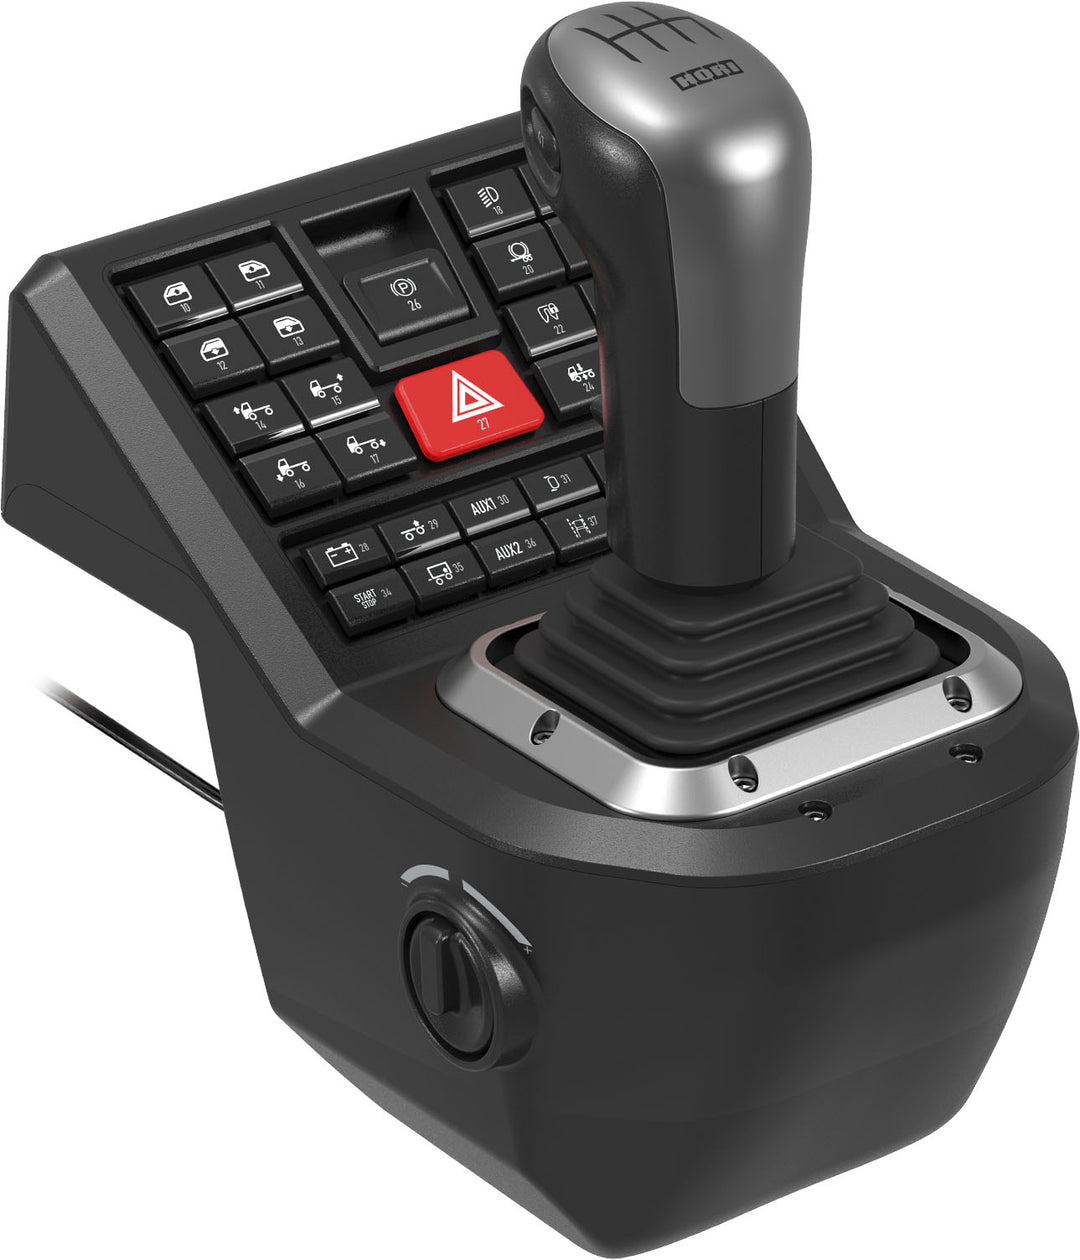 HORI Truck Control System for Windows 11/10 with Force Feedback Steering Wheel, Shifter Control Panel, & Pedals - Black_2